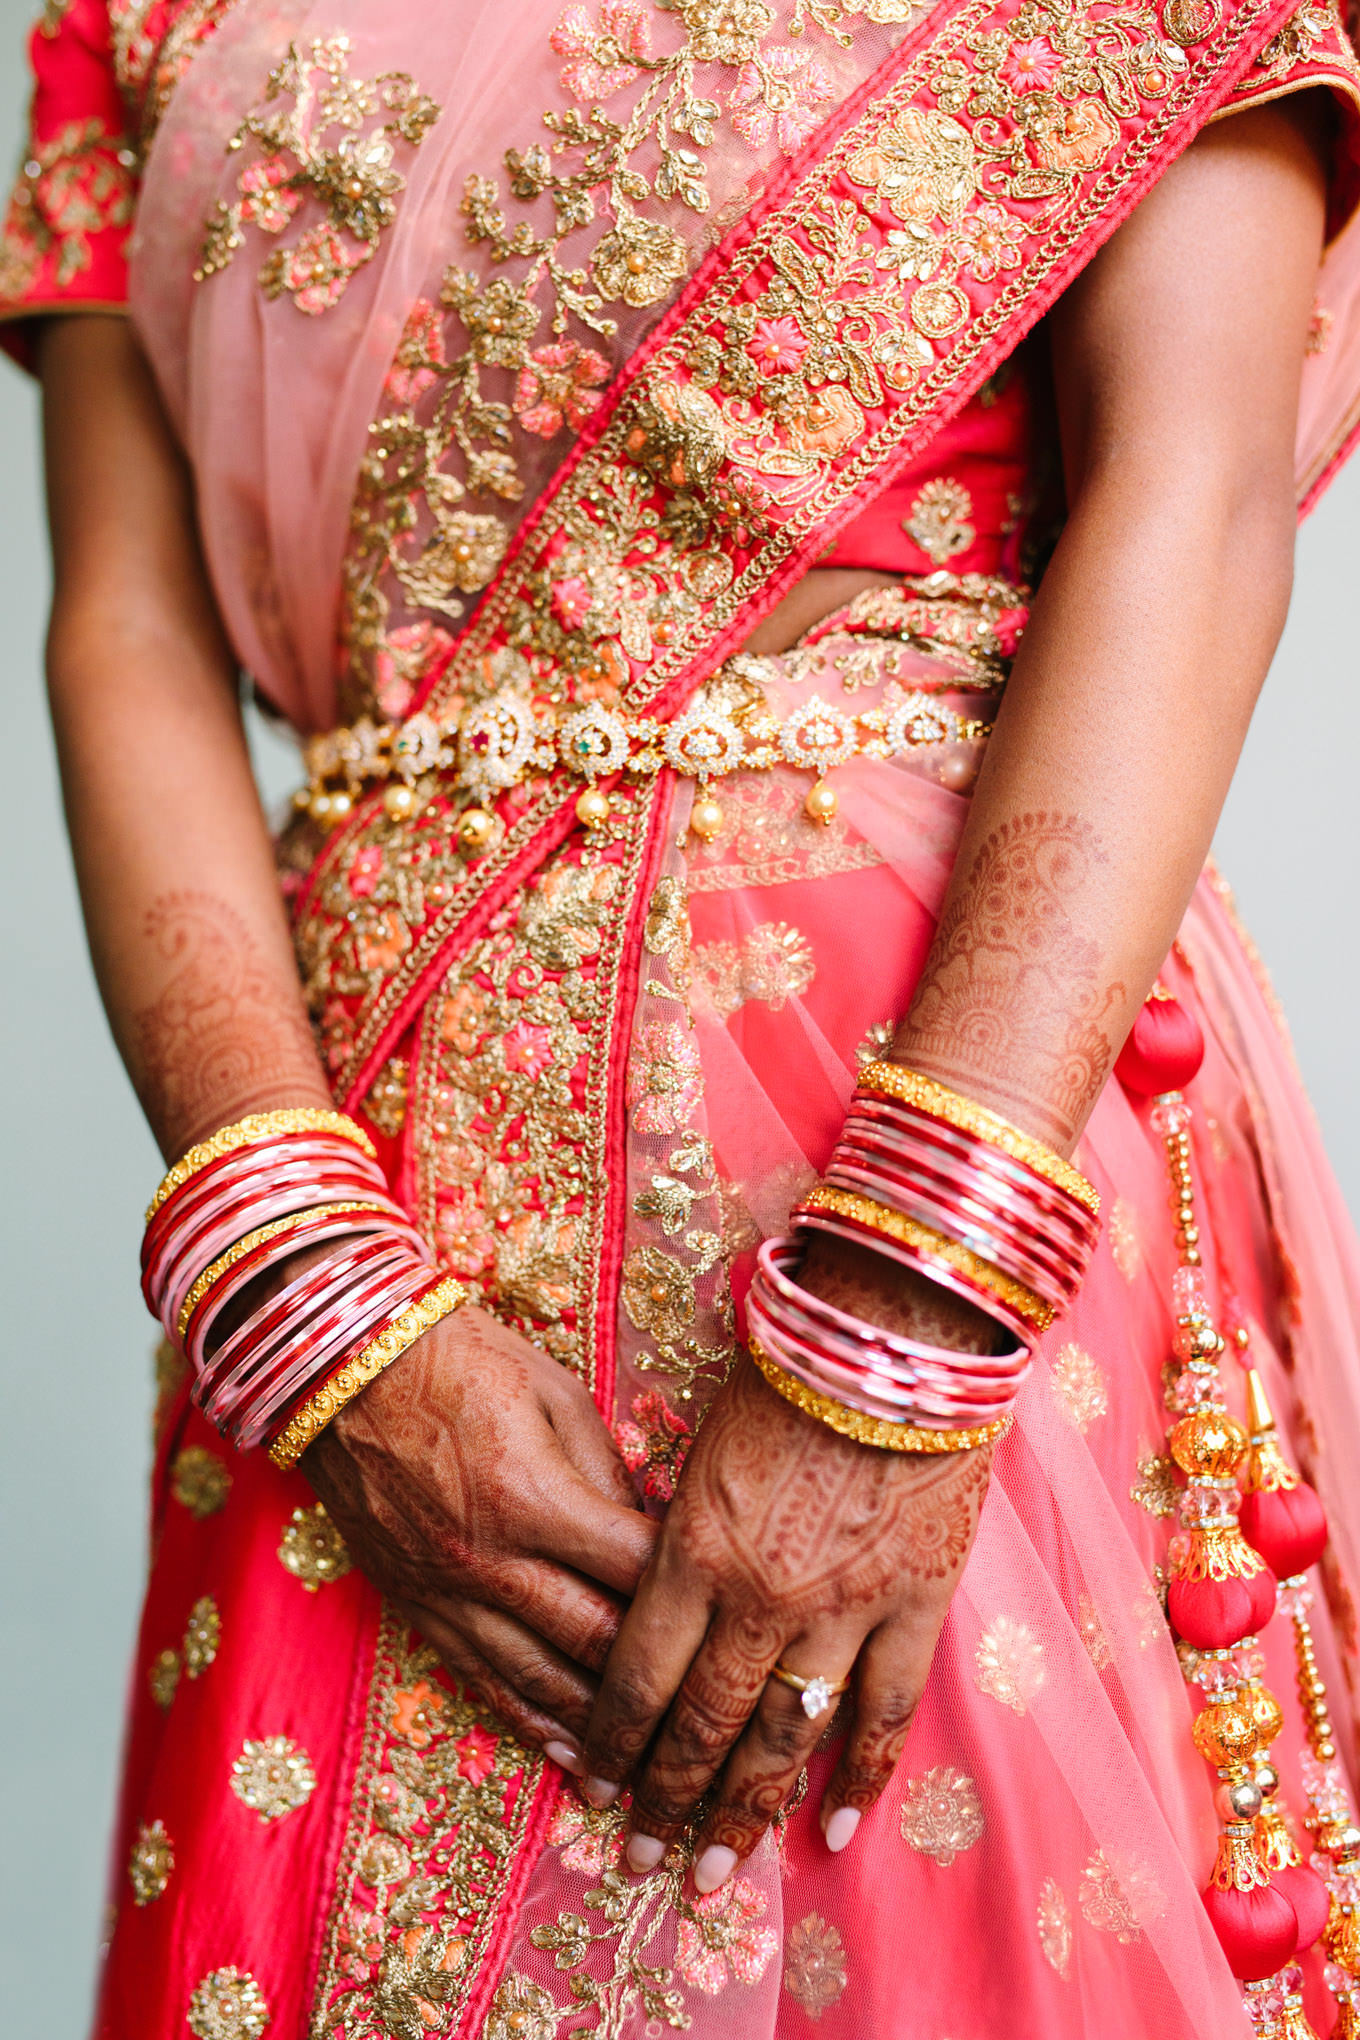 Red bridal saree, jewelry, and mehndi henna. Two Disney artists create a unique and colorful Indian Fusion wedding at The Fig House Los Angeles, featured on Green Wedding Shoes. | Colorful and elevated wedding inspiration for fun-loving couples in Southern California | #indianwedding #indianfusionwedding #thefighouse #losangeleswedding   Source: Mary Costa Photography | Los Angeles